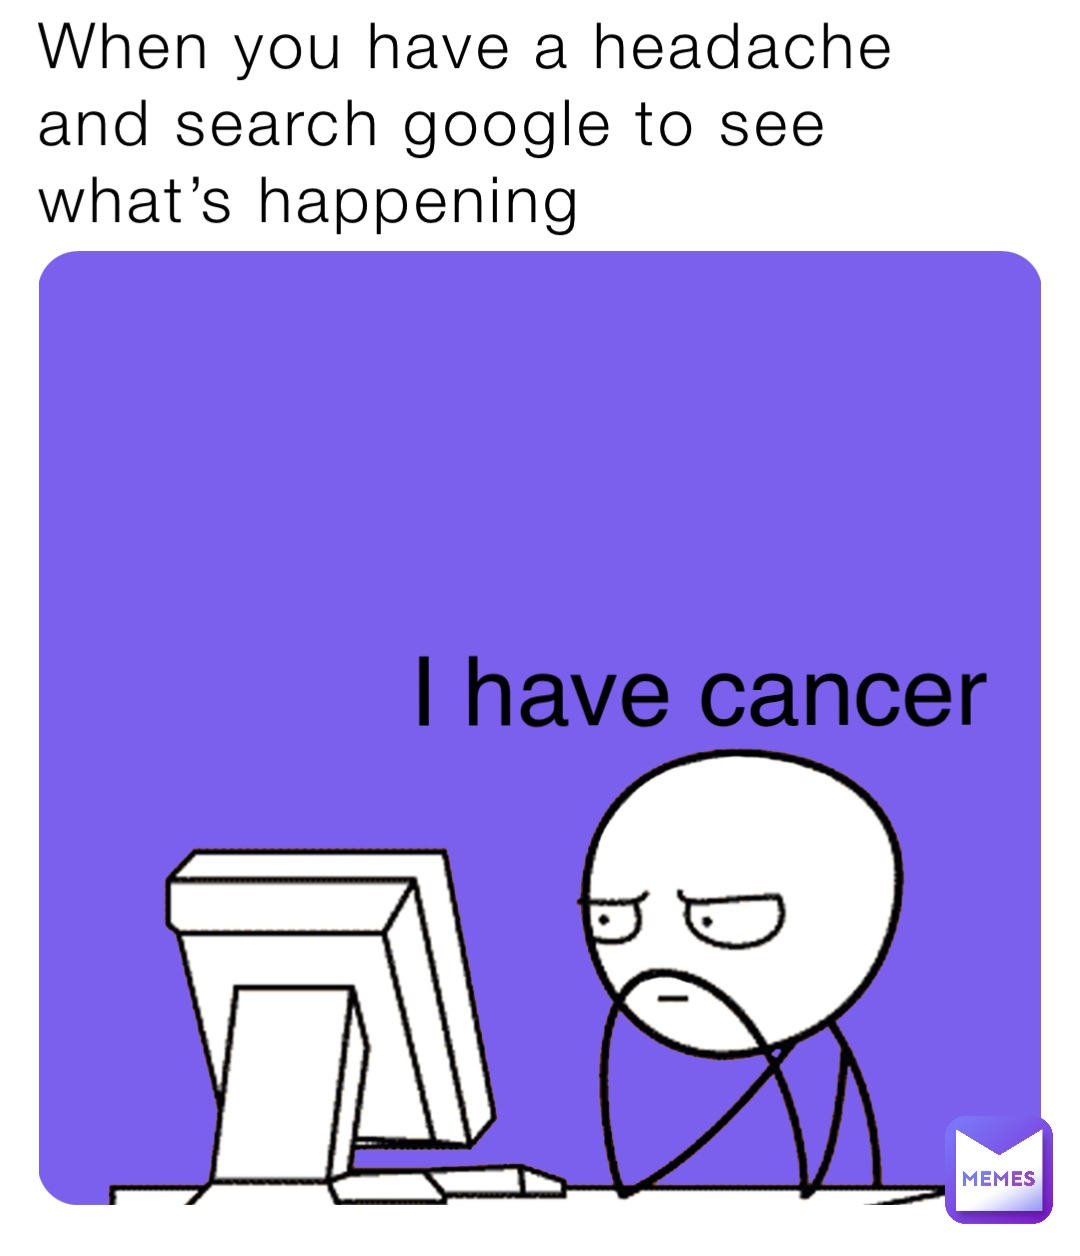 When you have a headache and search google to see what’s happening I have cancer